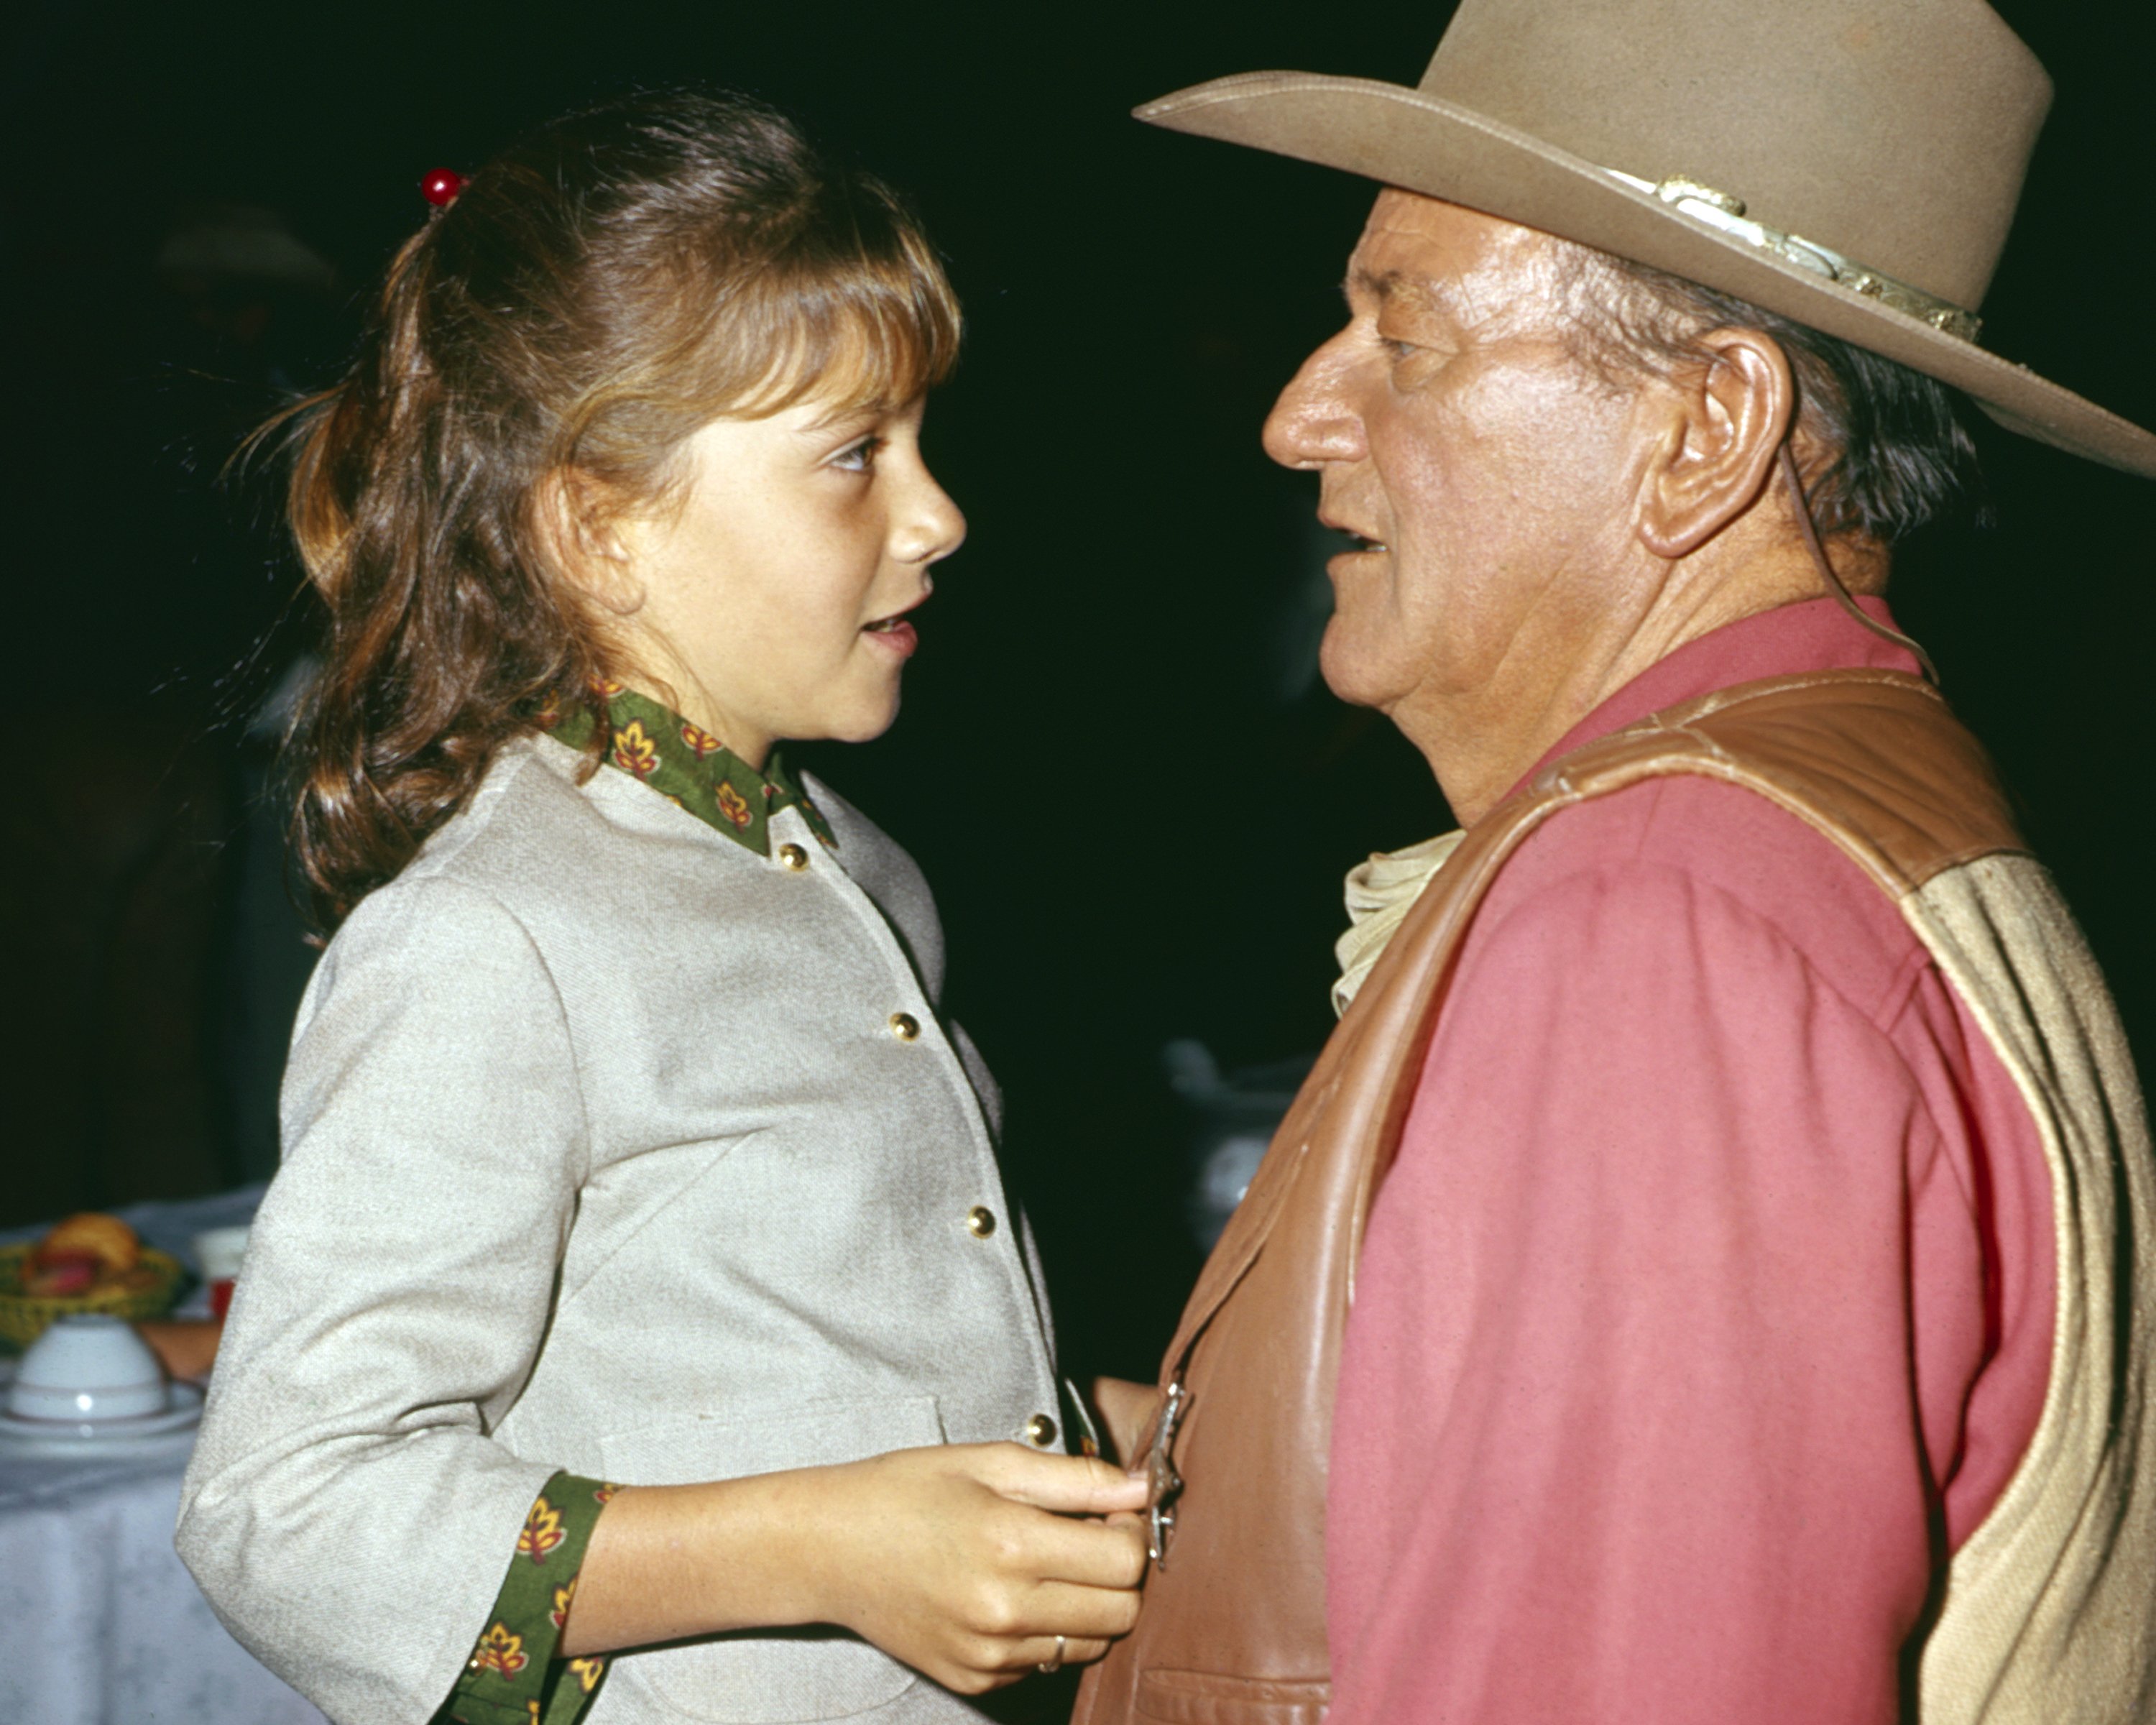 American actor John Wayne (1907 - 1979) talks with his daughter Aissa in an unspecified restaurant, 1967 | Source: Getty Images